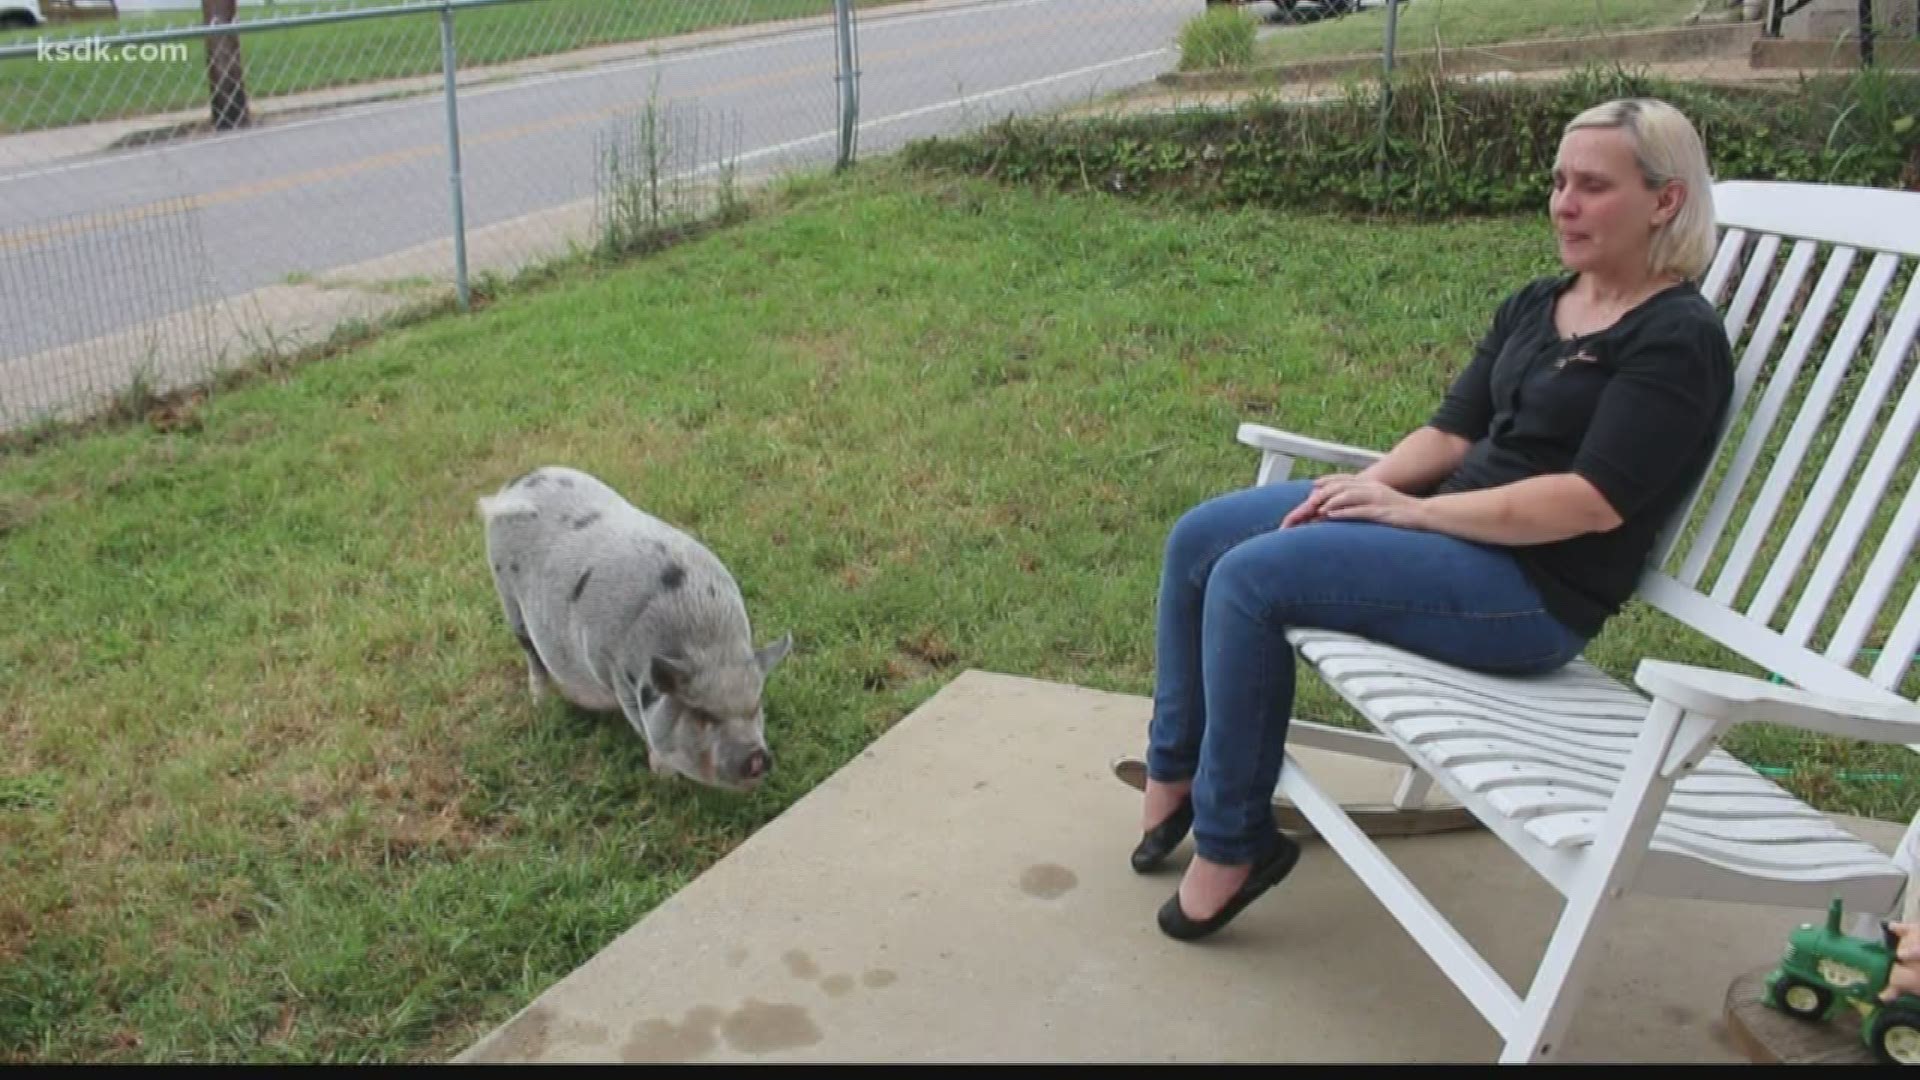 Man fights town to keep potbellied pig as his emotional support animal